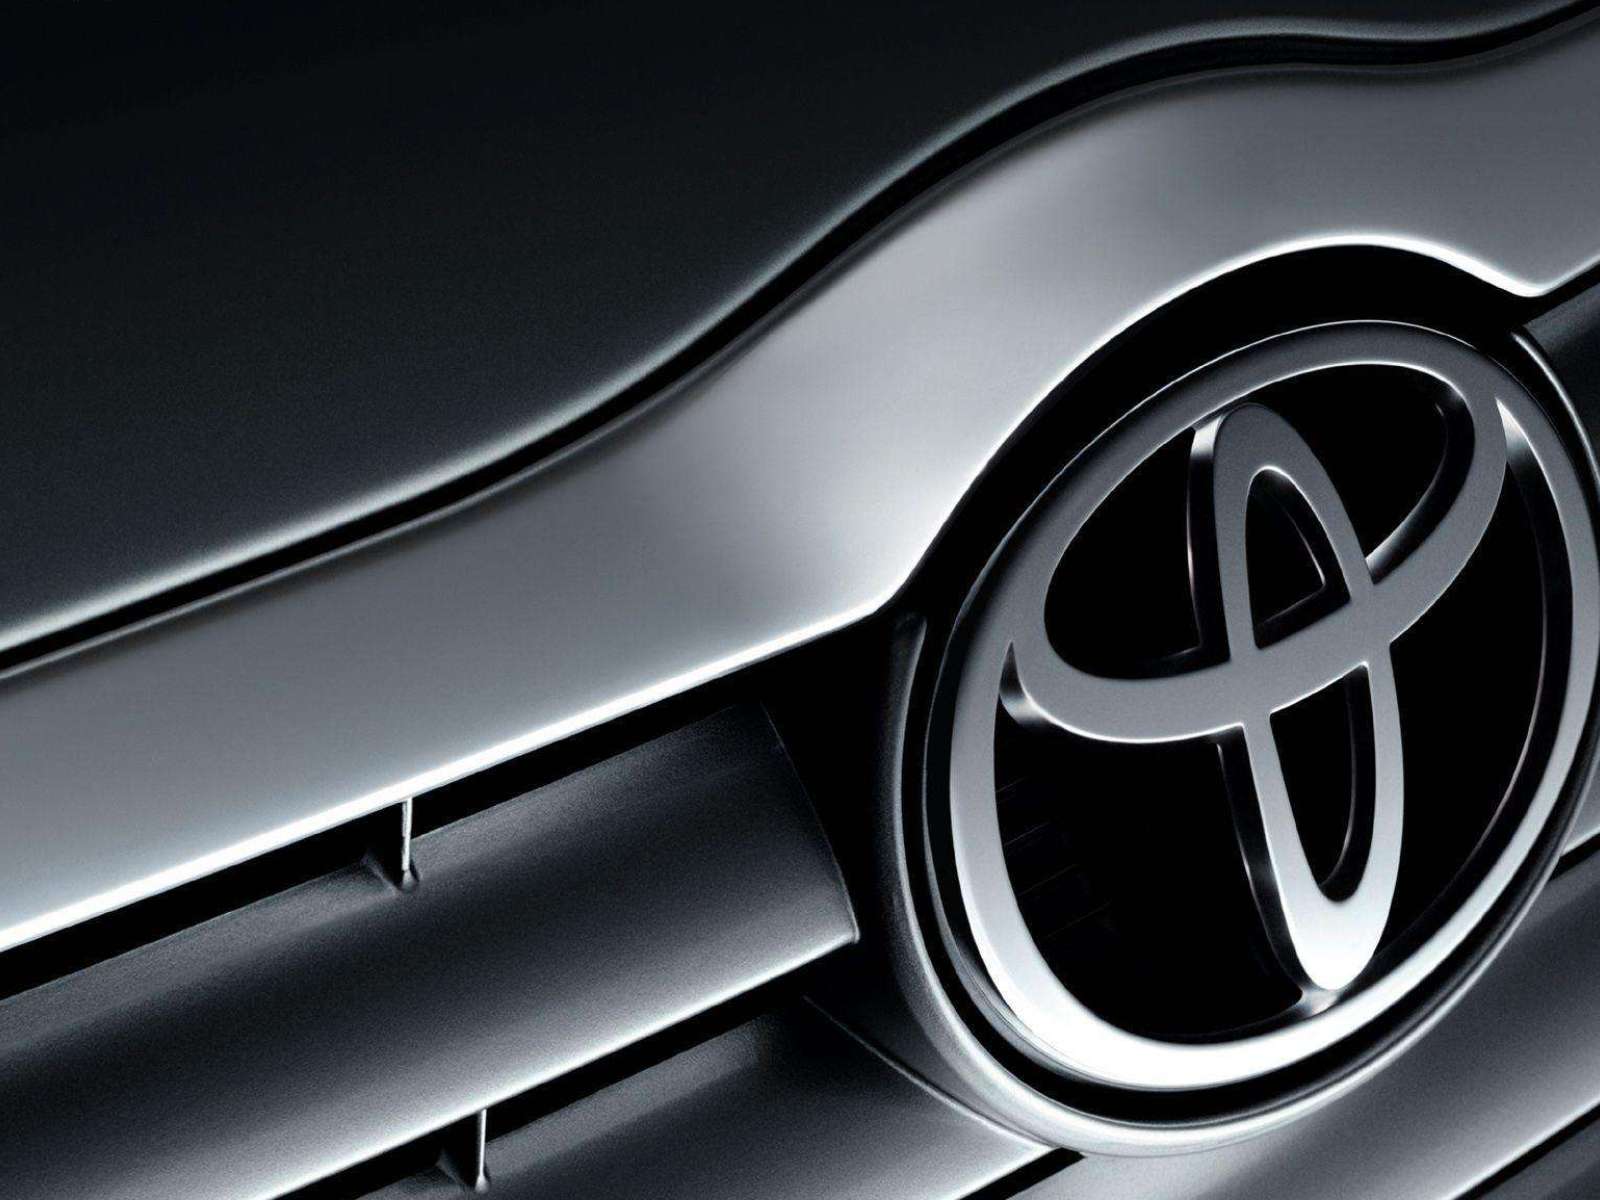 Toyota Grille Logo Wallpaper From